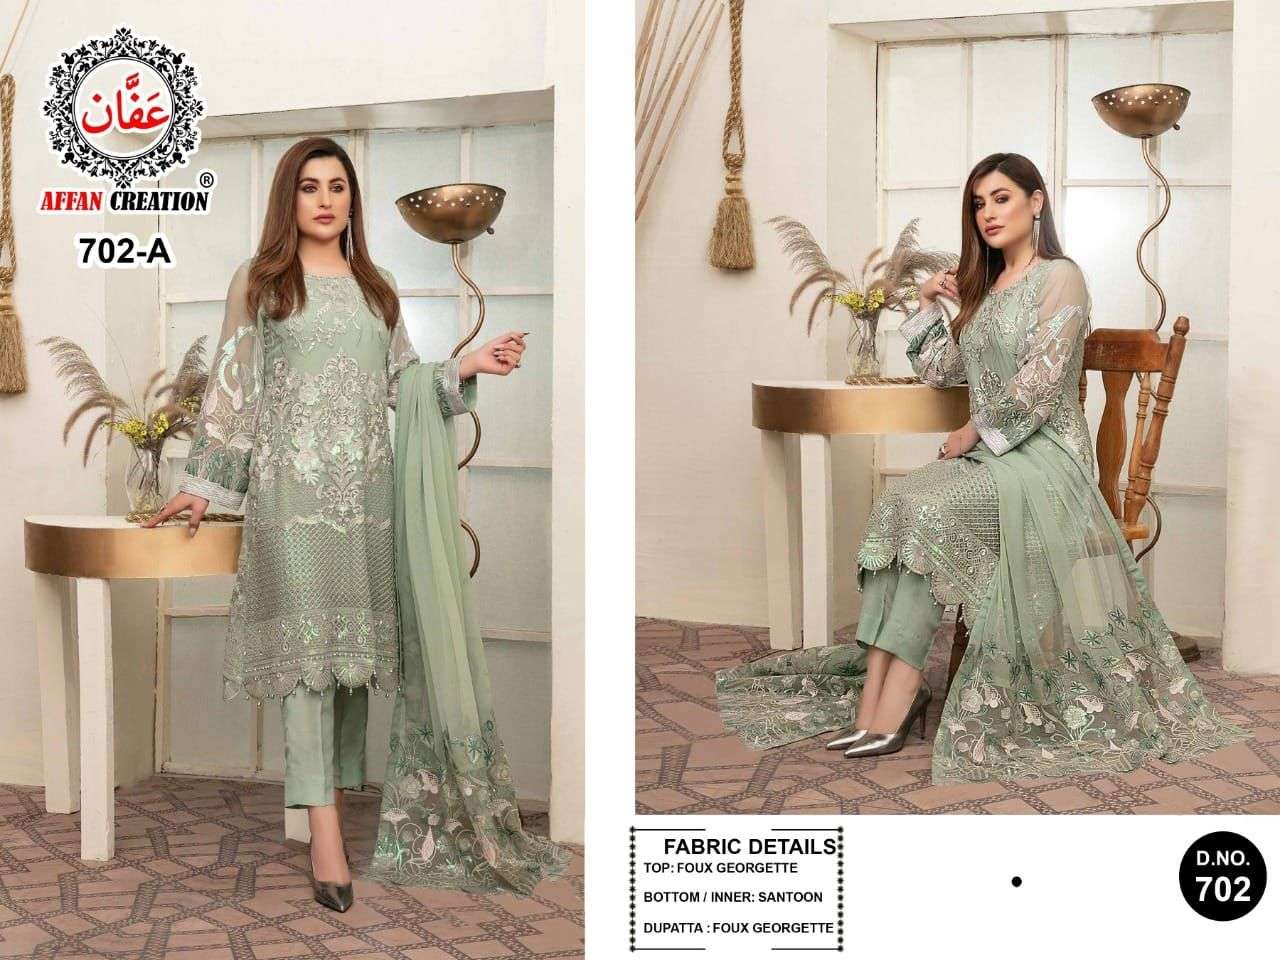 AFFAN CREATION 704 COLOURS BY AFFAN CREATION 704-A TO 704-D SERIES Z BEAUTIFUL PAKISTANI SUITS COLORFUL STYLISH FANCY CASUAL WEAR & ETHNIC WEAR FAUX GEORGETTE WITH EMBROIDERY DRESSES AT WHOLESALE PRICE